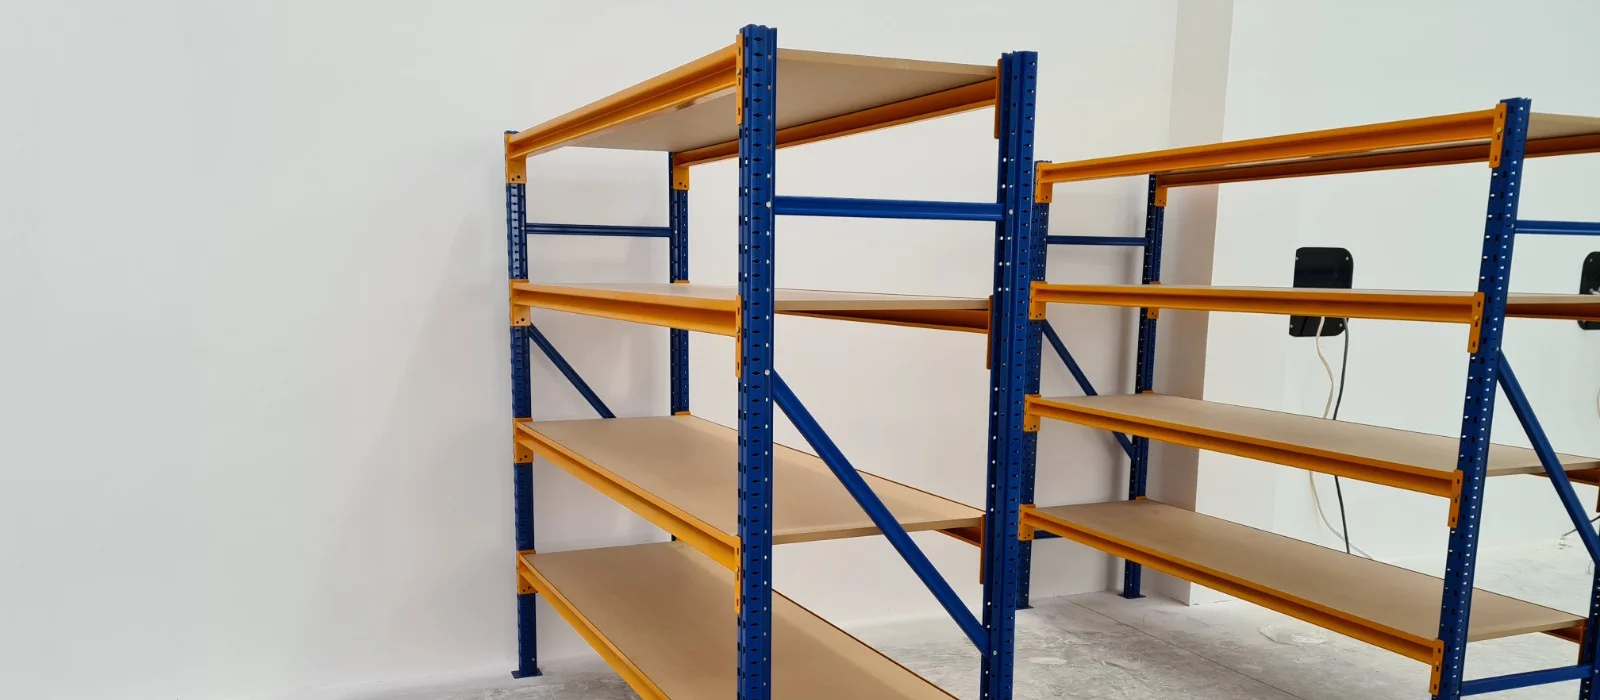 Bridons PictonWorkbench and Stackit Series Shelving